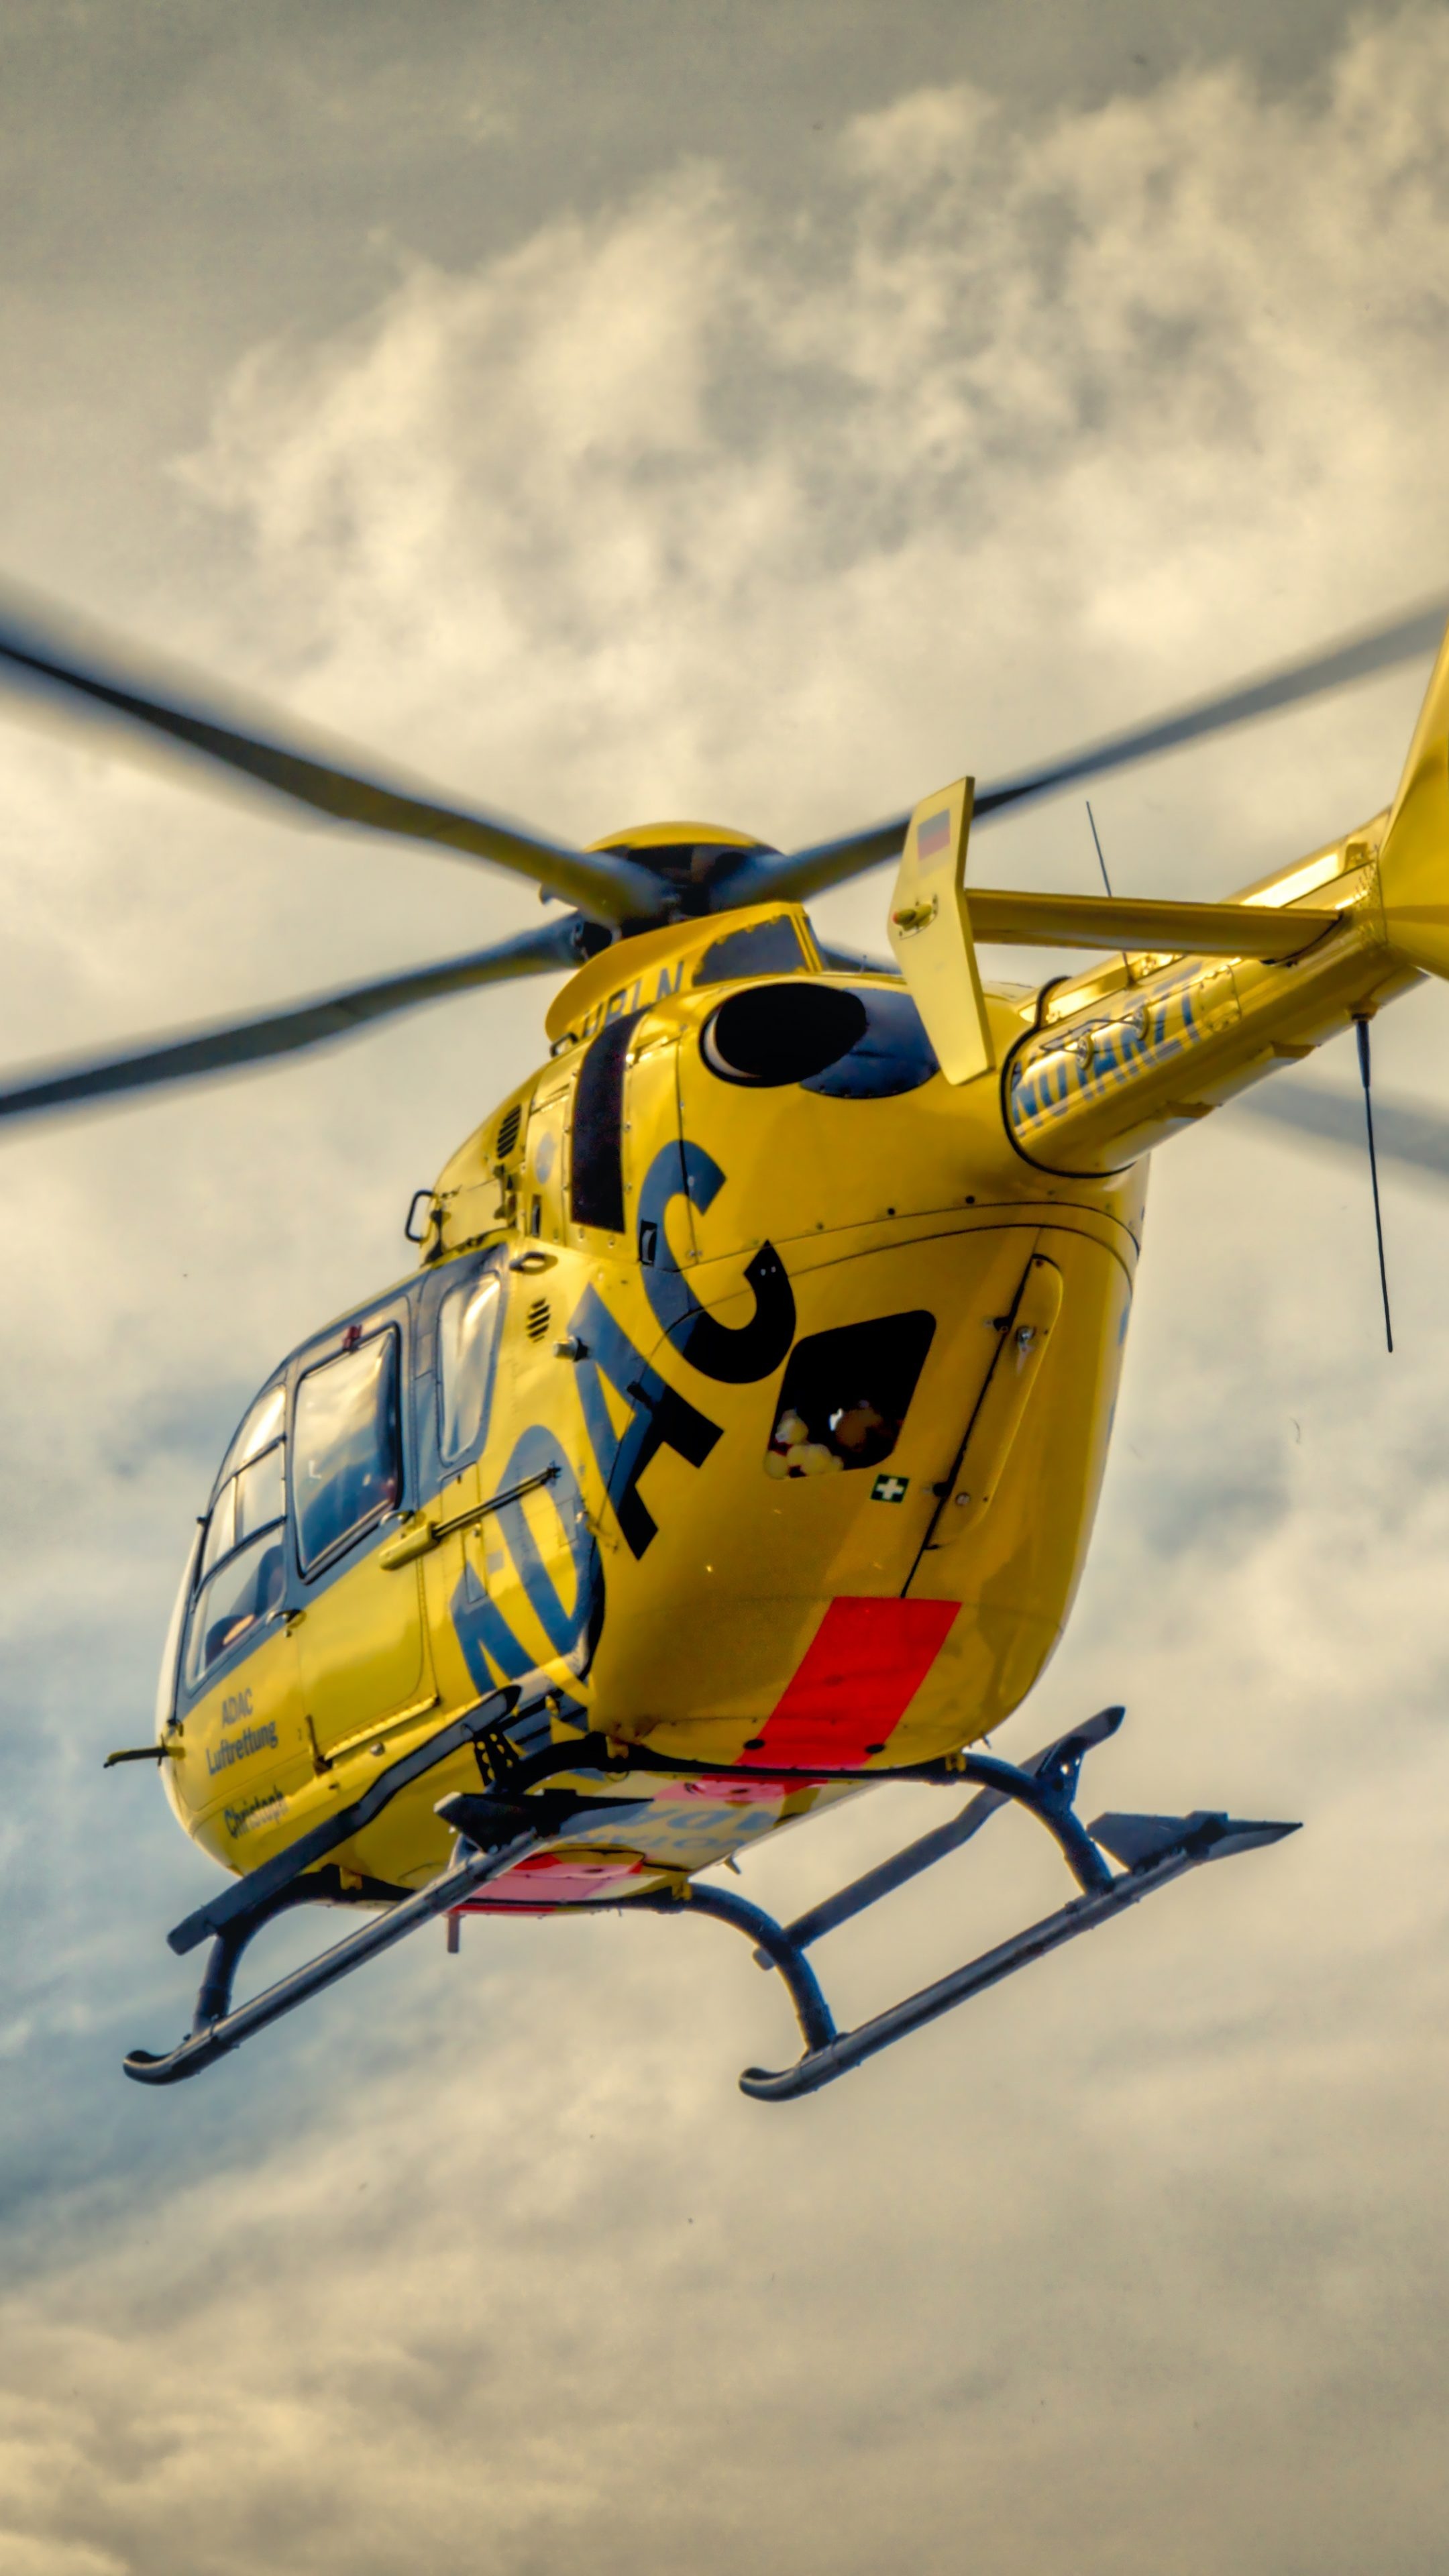 Adac rescue helicopter, Electrically powered rotor, Game-changing technology, Future innovation, 2160x3840 4K Handy